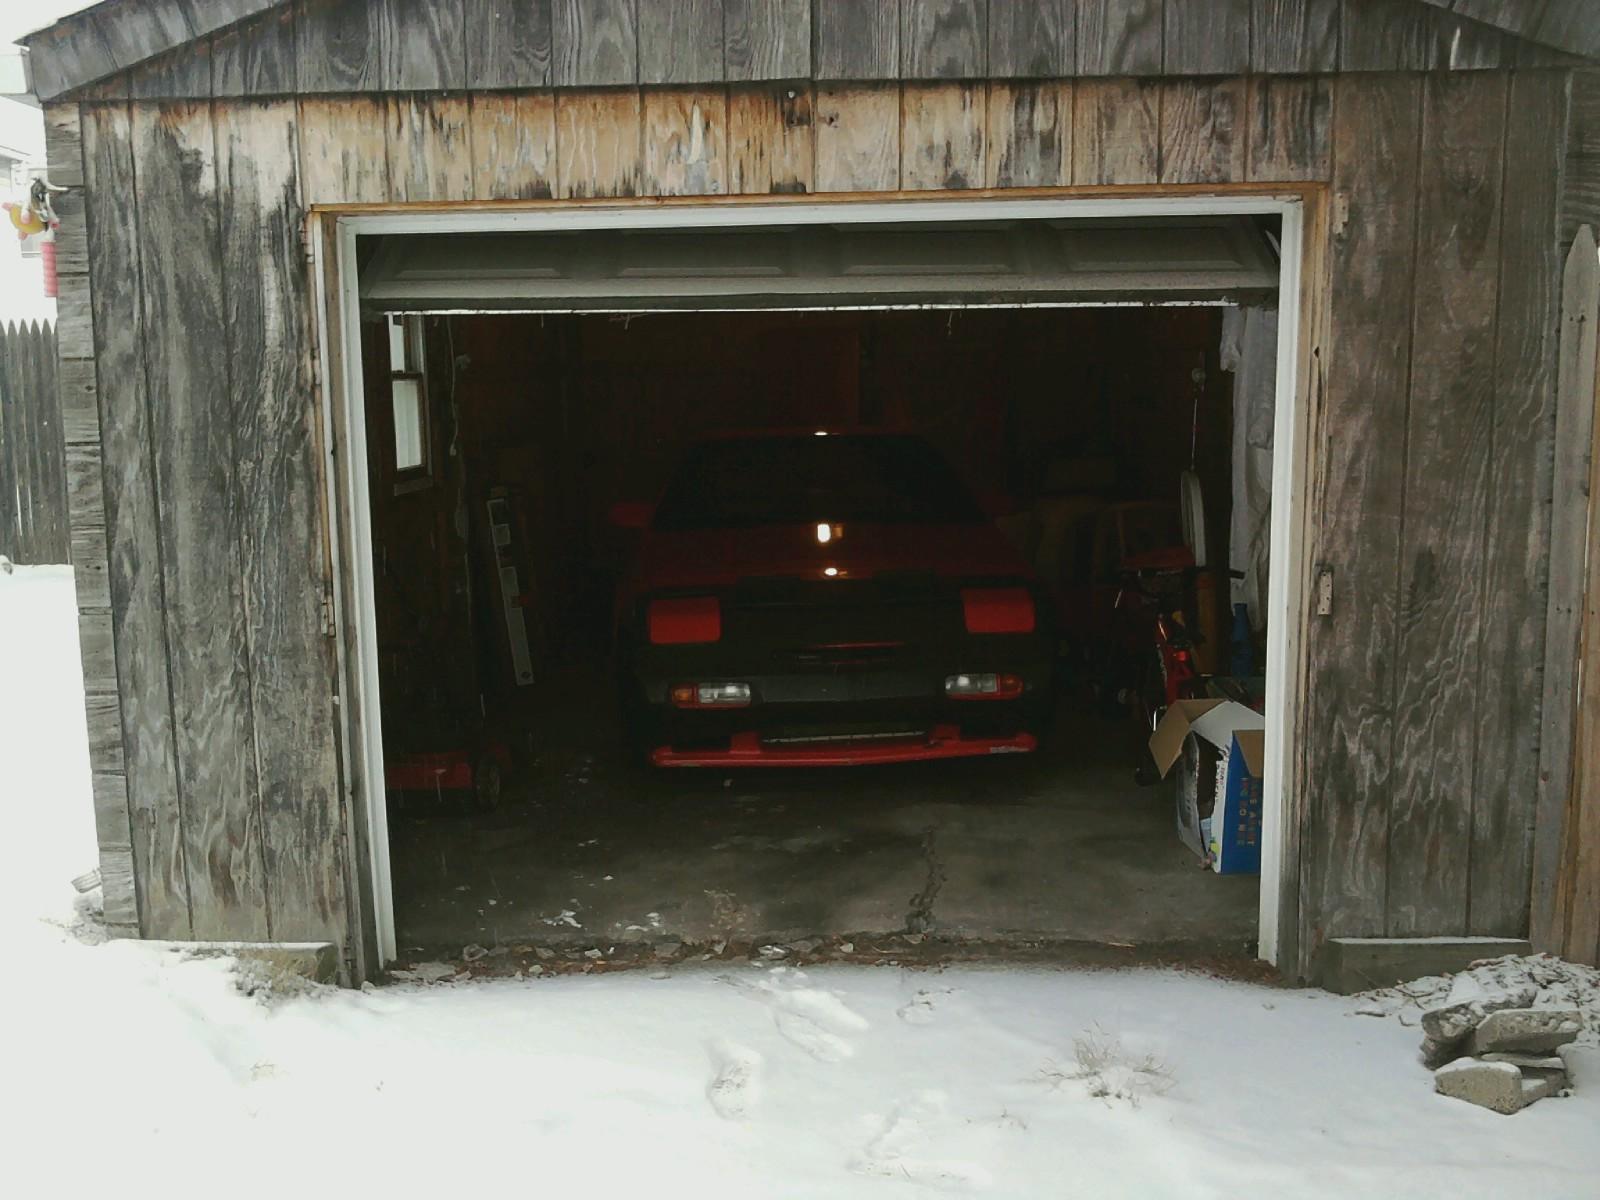 Thank heavens for garages!!!